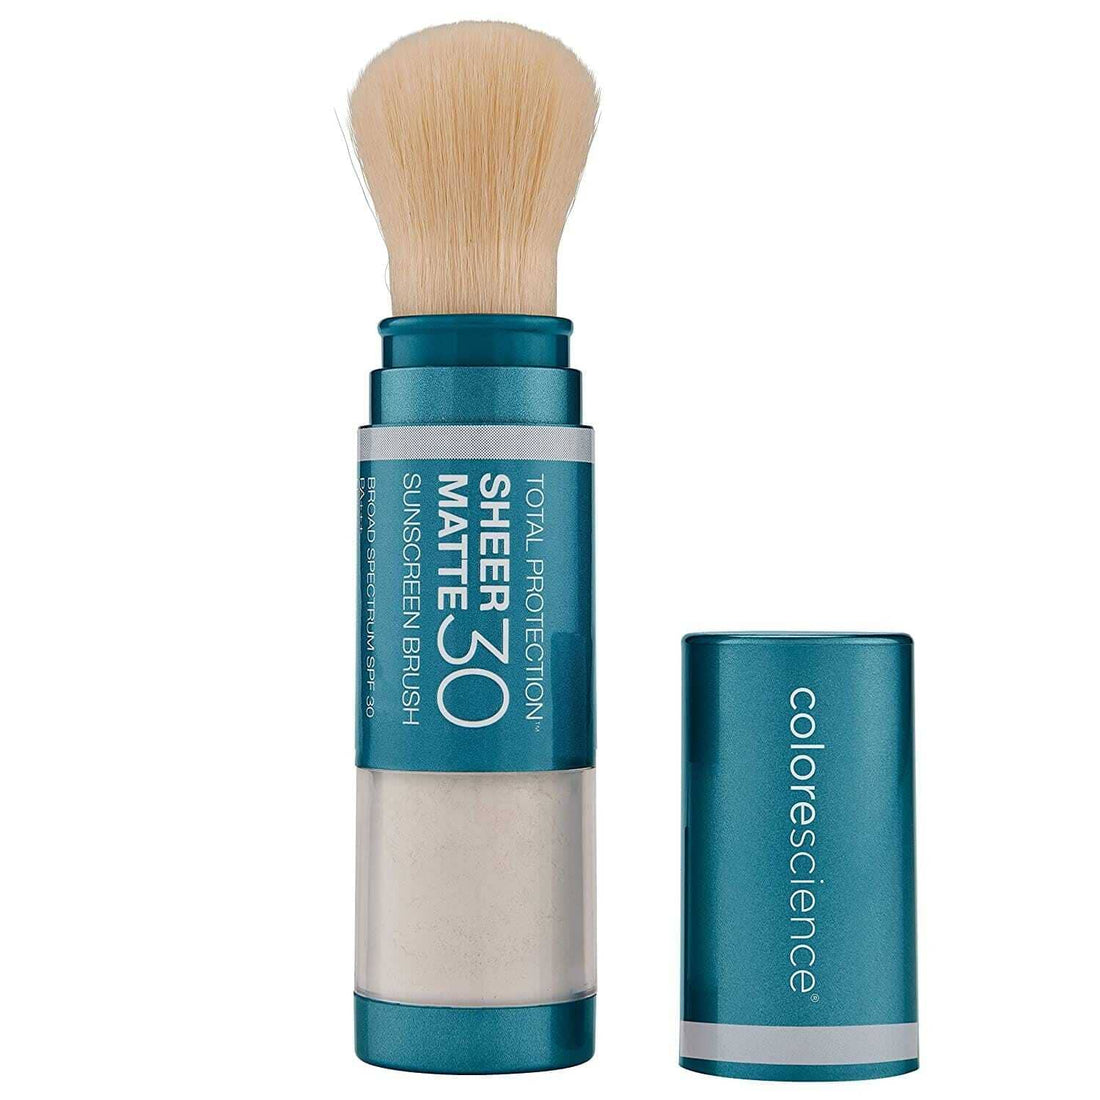 Colorescience Sunforgettable Total Protection Sheer Matte SPF 30 Sunscreen Brush Colorescience 0.15 oz. Shop at Skin Type Solutions